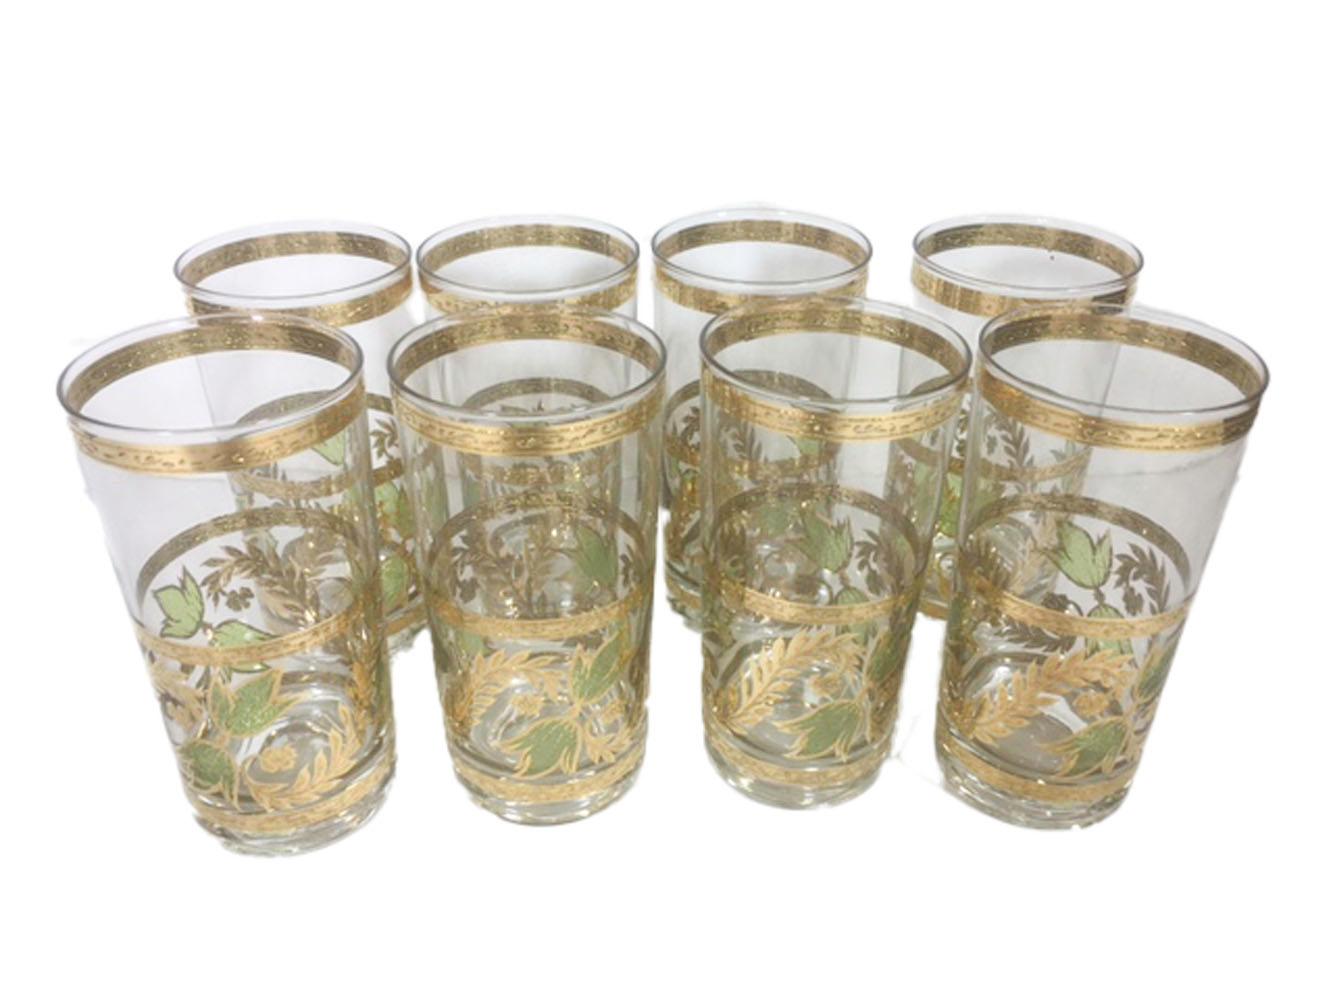 Vintage Mid-Century Modern highball glasses by Culver LTD. decorated with 22 karat gold and translucent green enamel. The lower half of the glass with a wide band of gold vines with green enamel leaves. All in excellent condition.